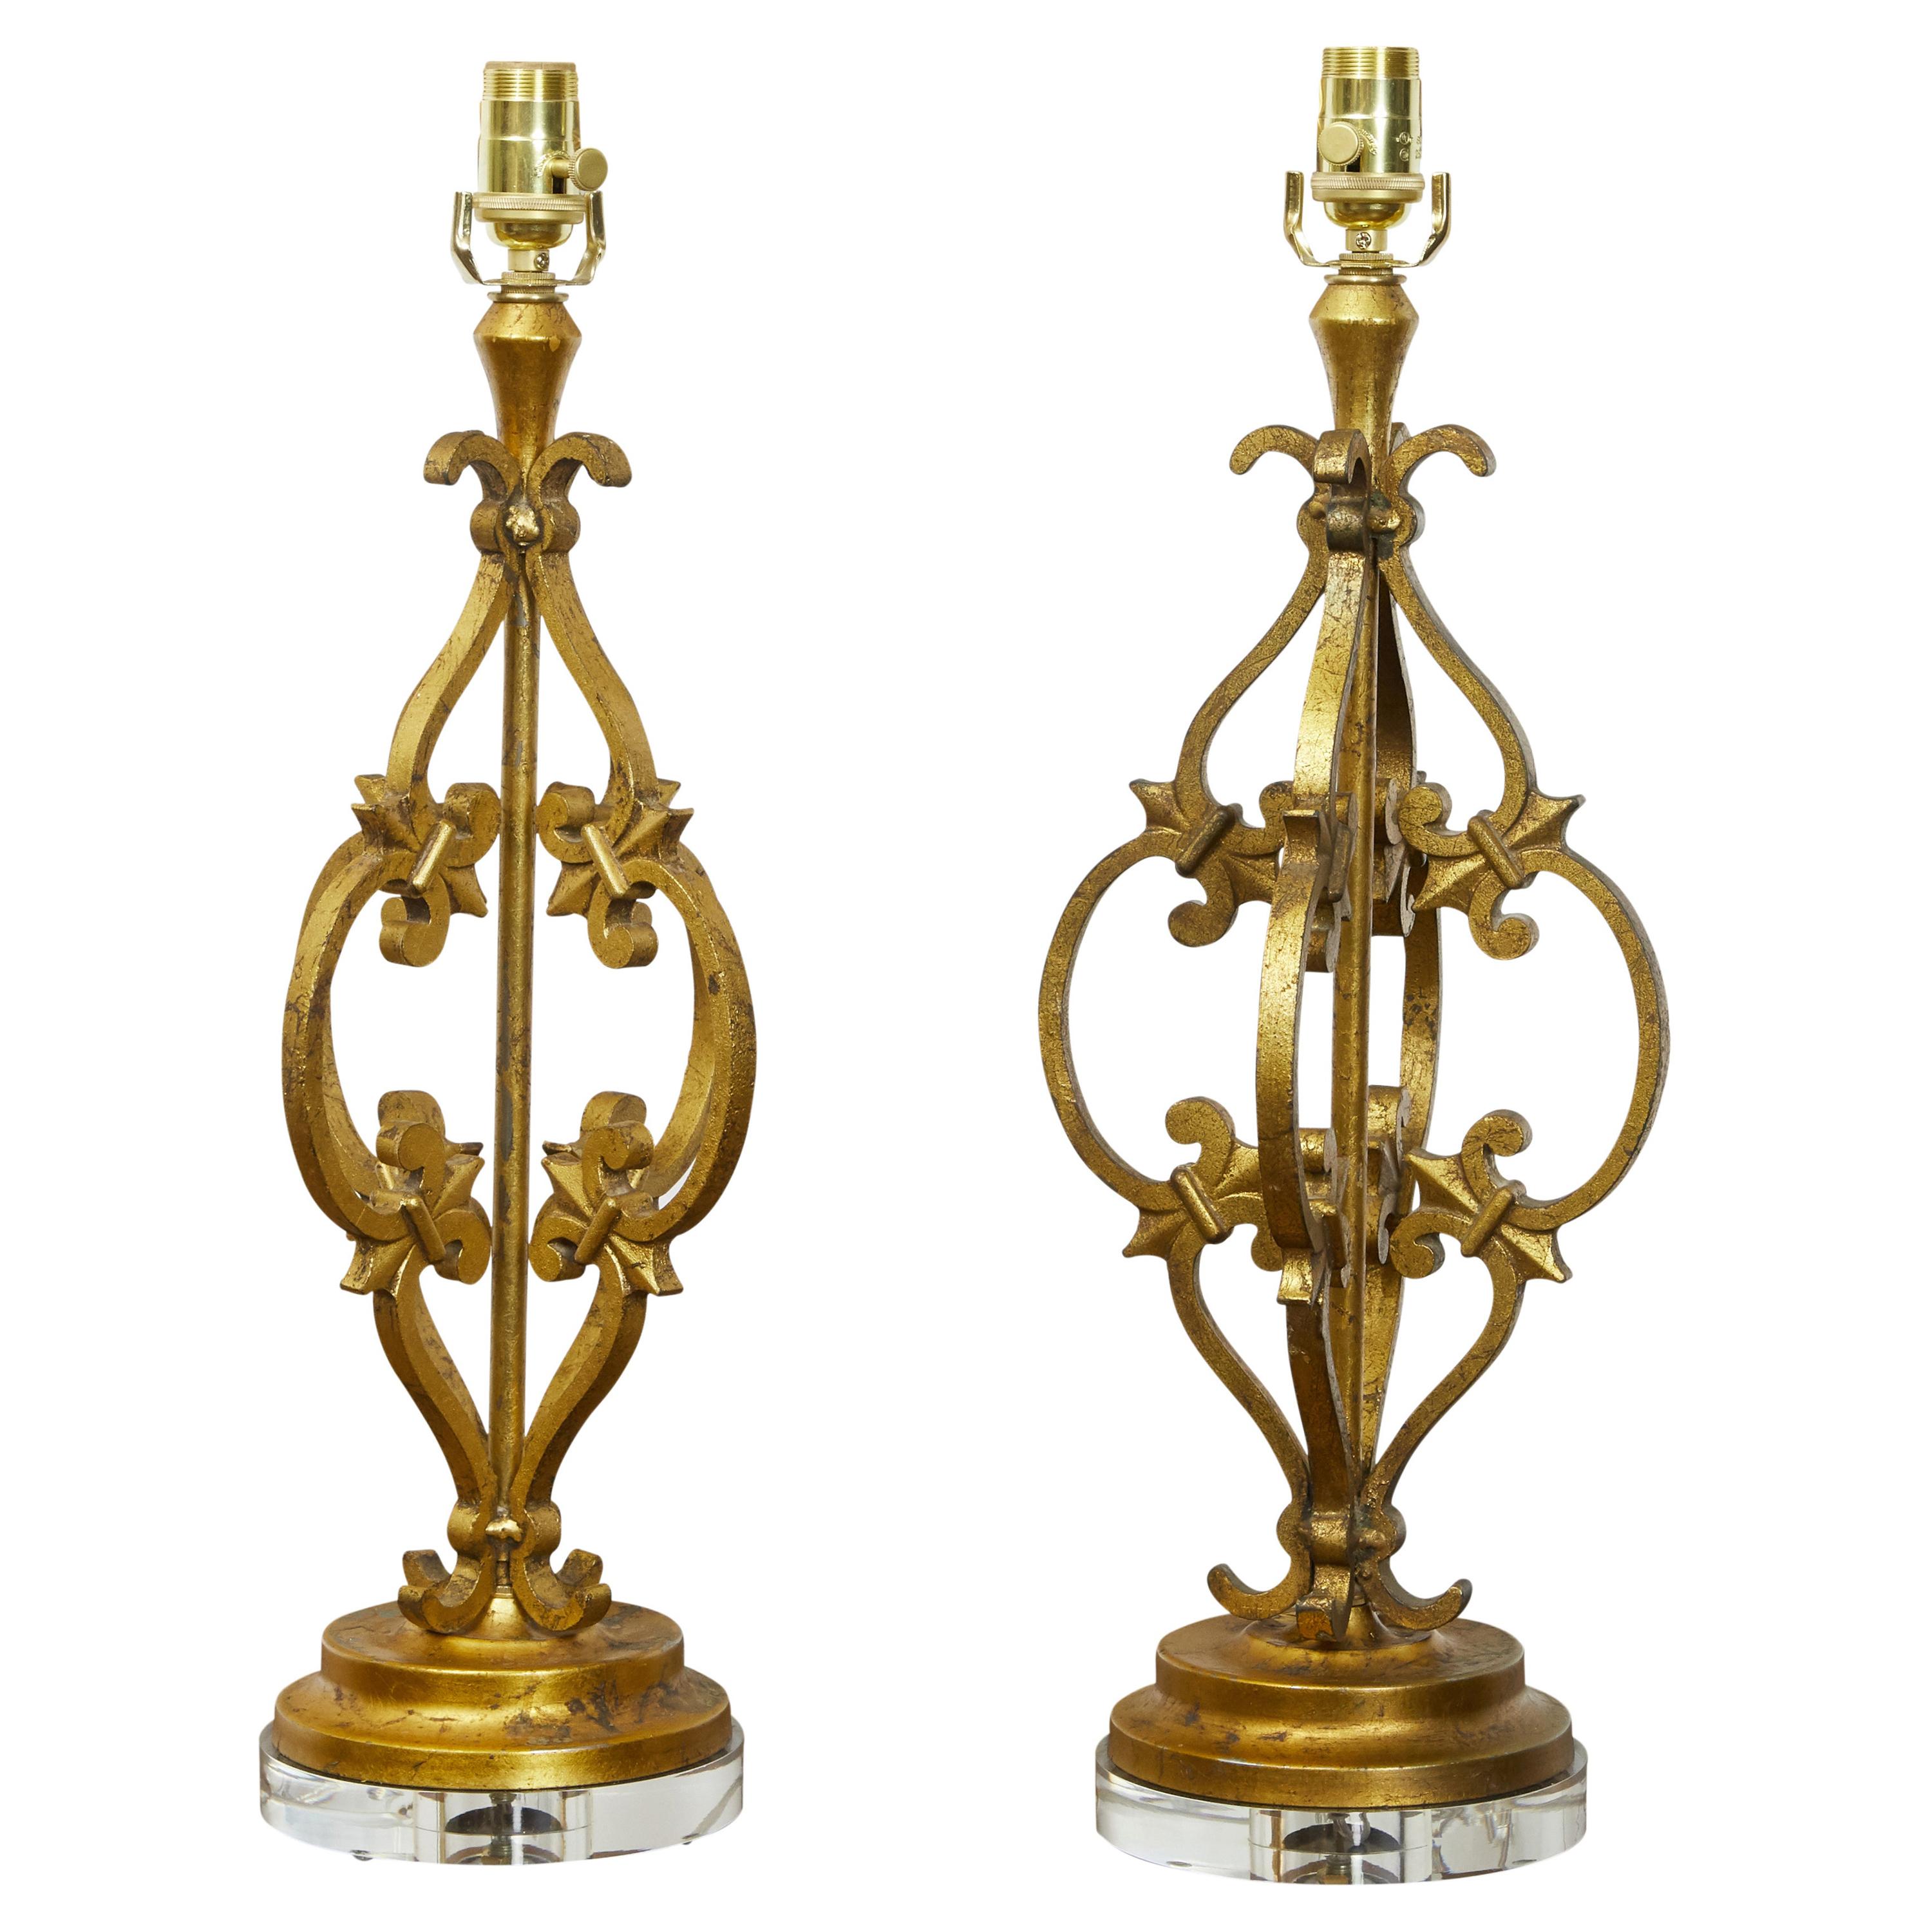 Pair of French Midcentury Gilt Metal Table Lamps with Scrolls and Fleur de Lys